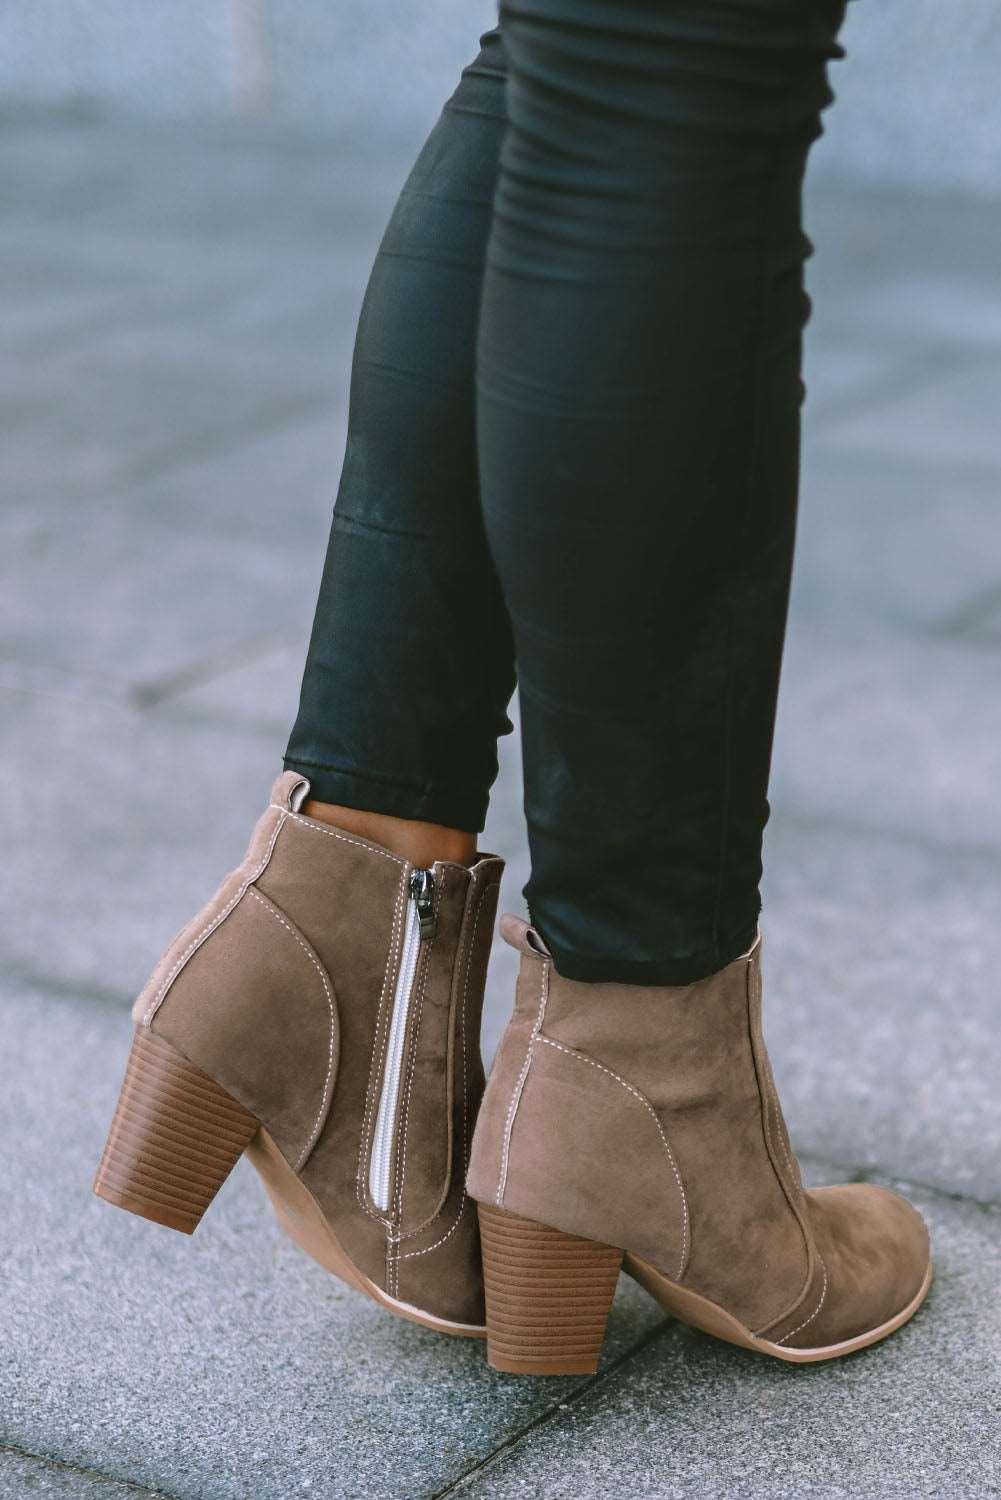 Faux Suede Size Zip Heeled Boots